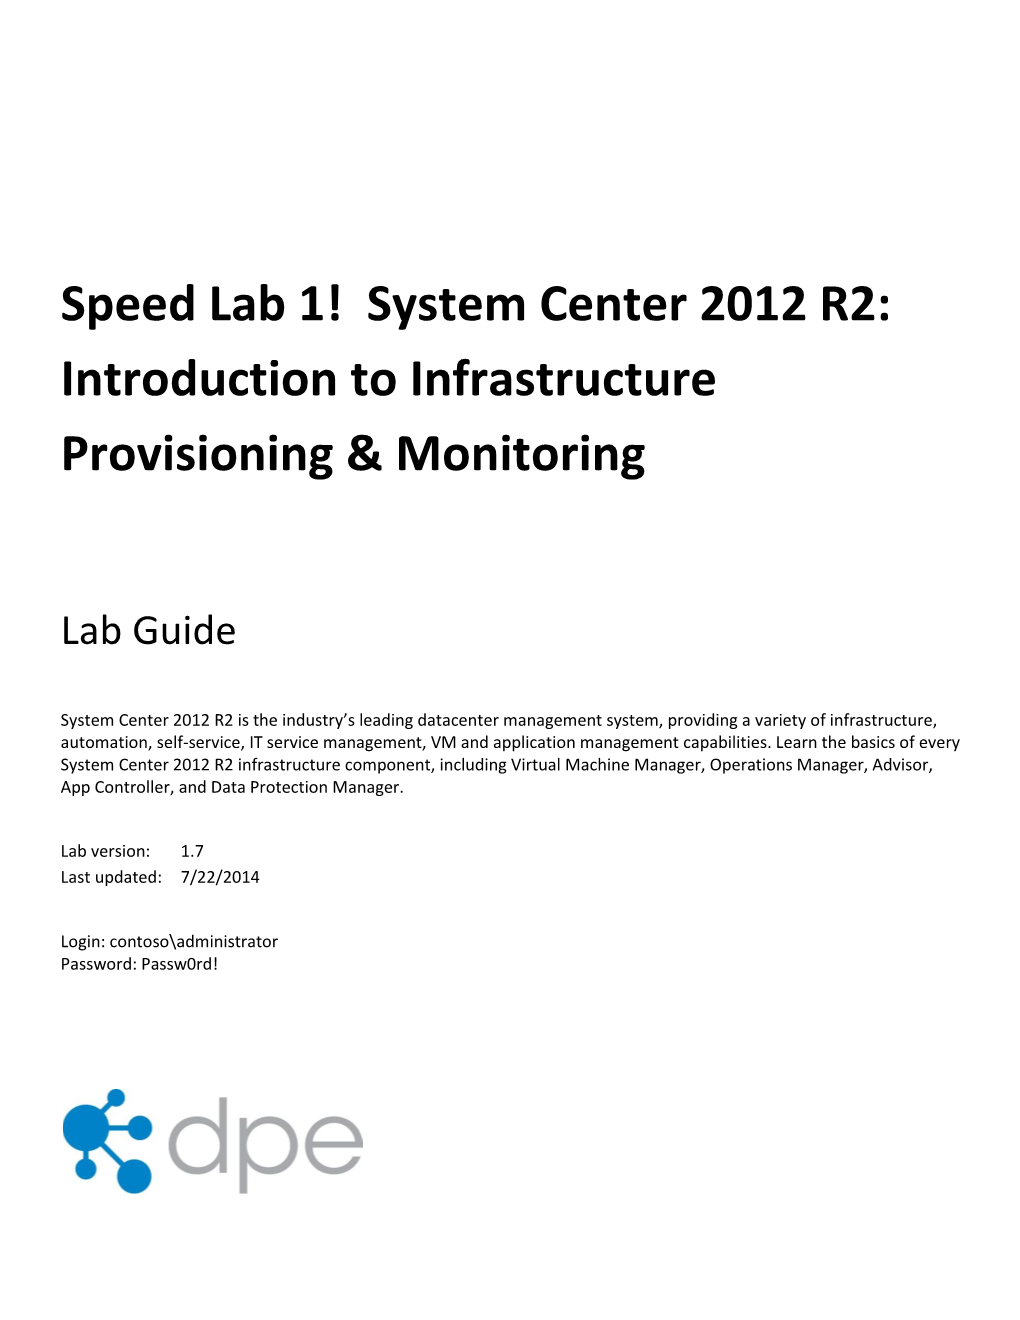 Speed Lab 1! System Center 2012 R2: Introduction to Infrastructure Provisioning & Monitoring